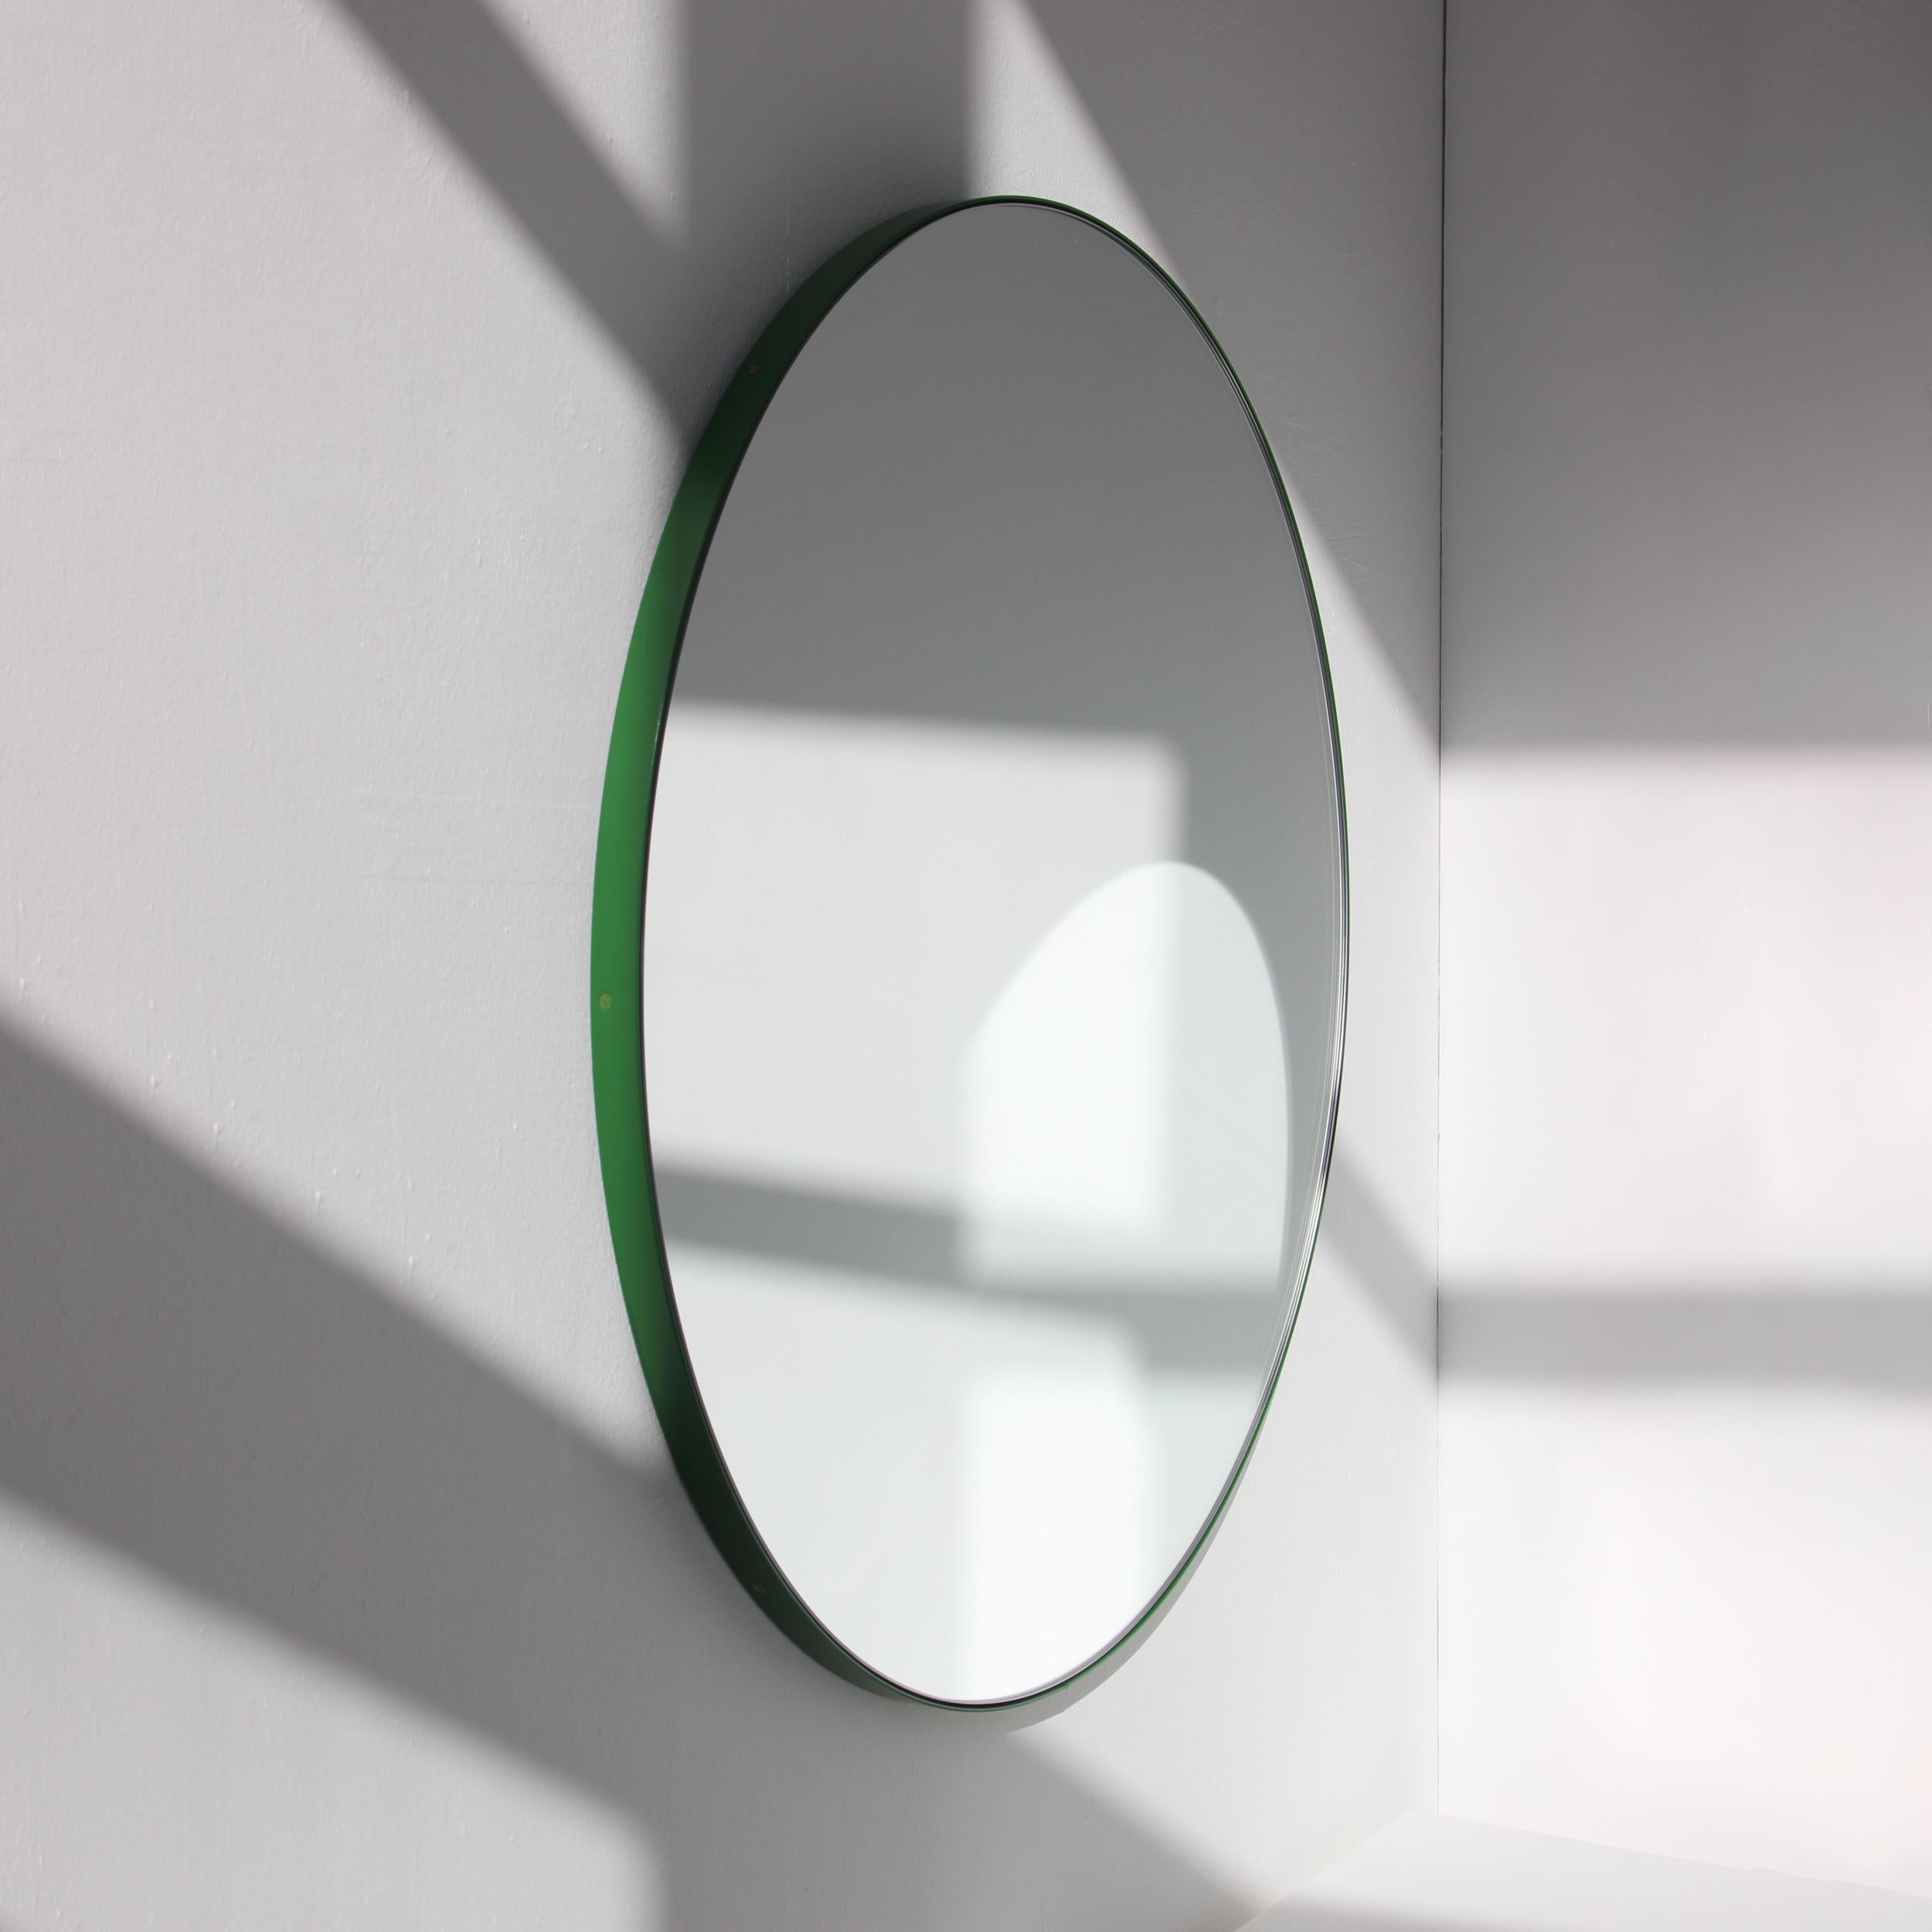 Powder-Coated Orbis Round Minimalist Mirror with Green Frame, Small For Sale